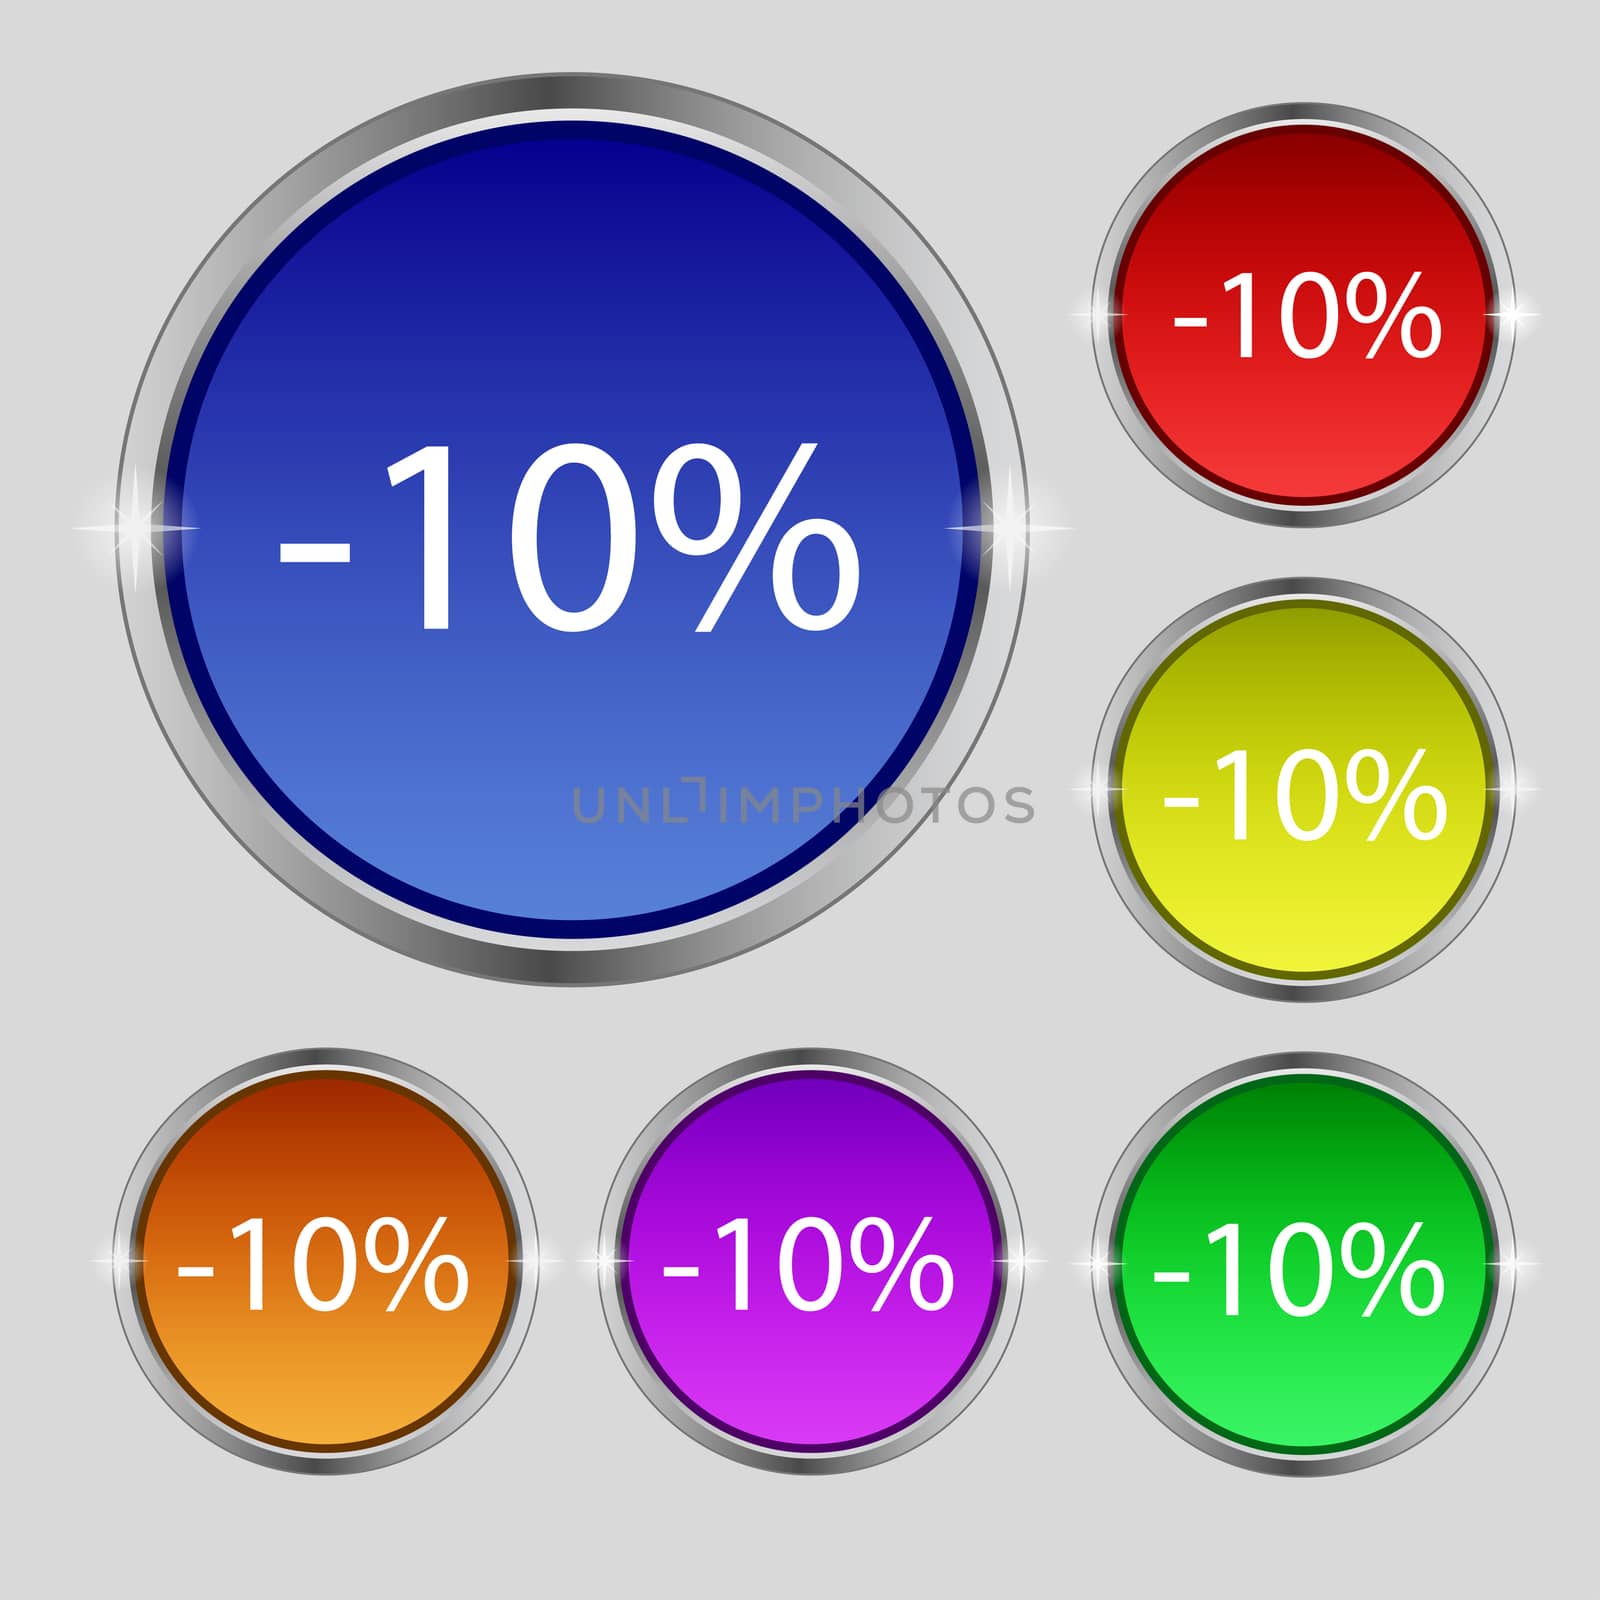 10 percent discount sign icon. Sale symbol. Special offer label. Set of colored buttons illustration